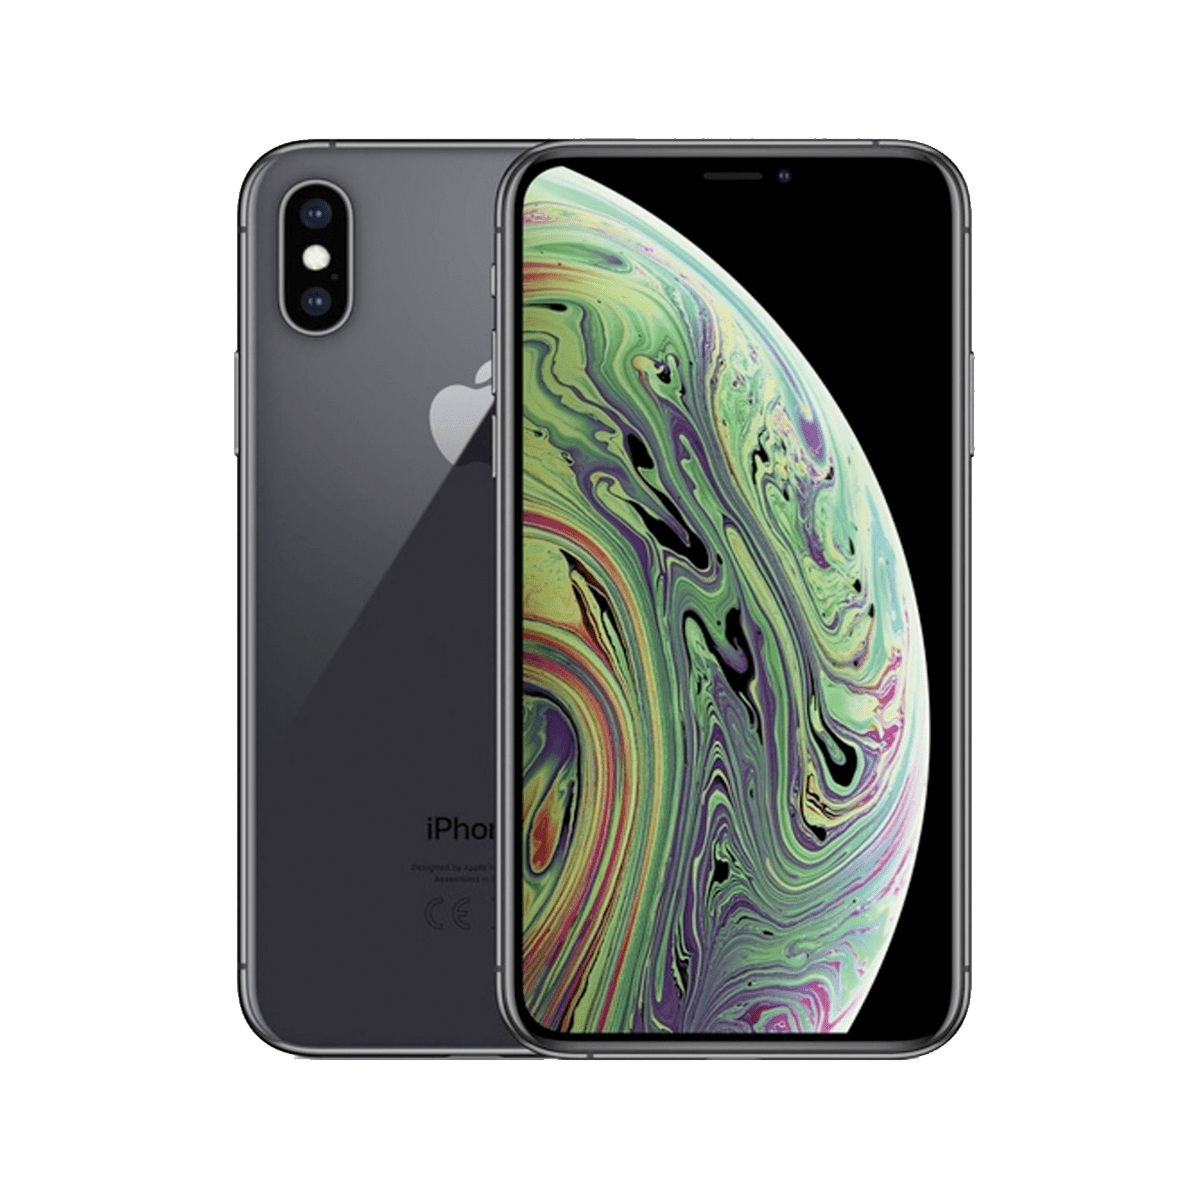 Pre-Owned Apple iPhone XS Max 64GB Space Gray Fully Unlocked (No Face ID)  (Refurbished: Good)